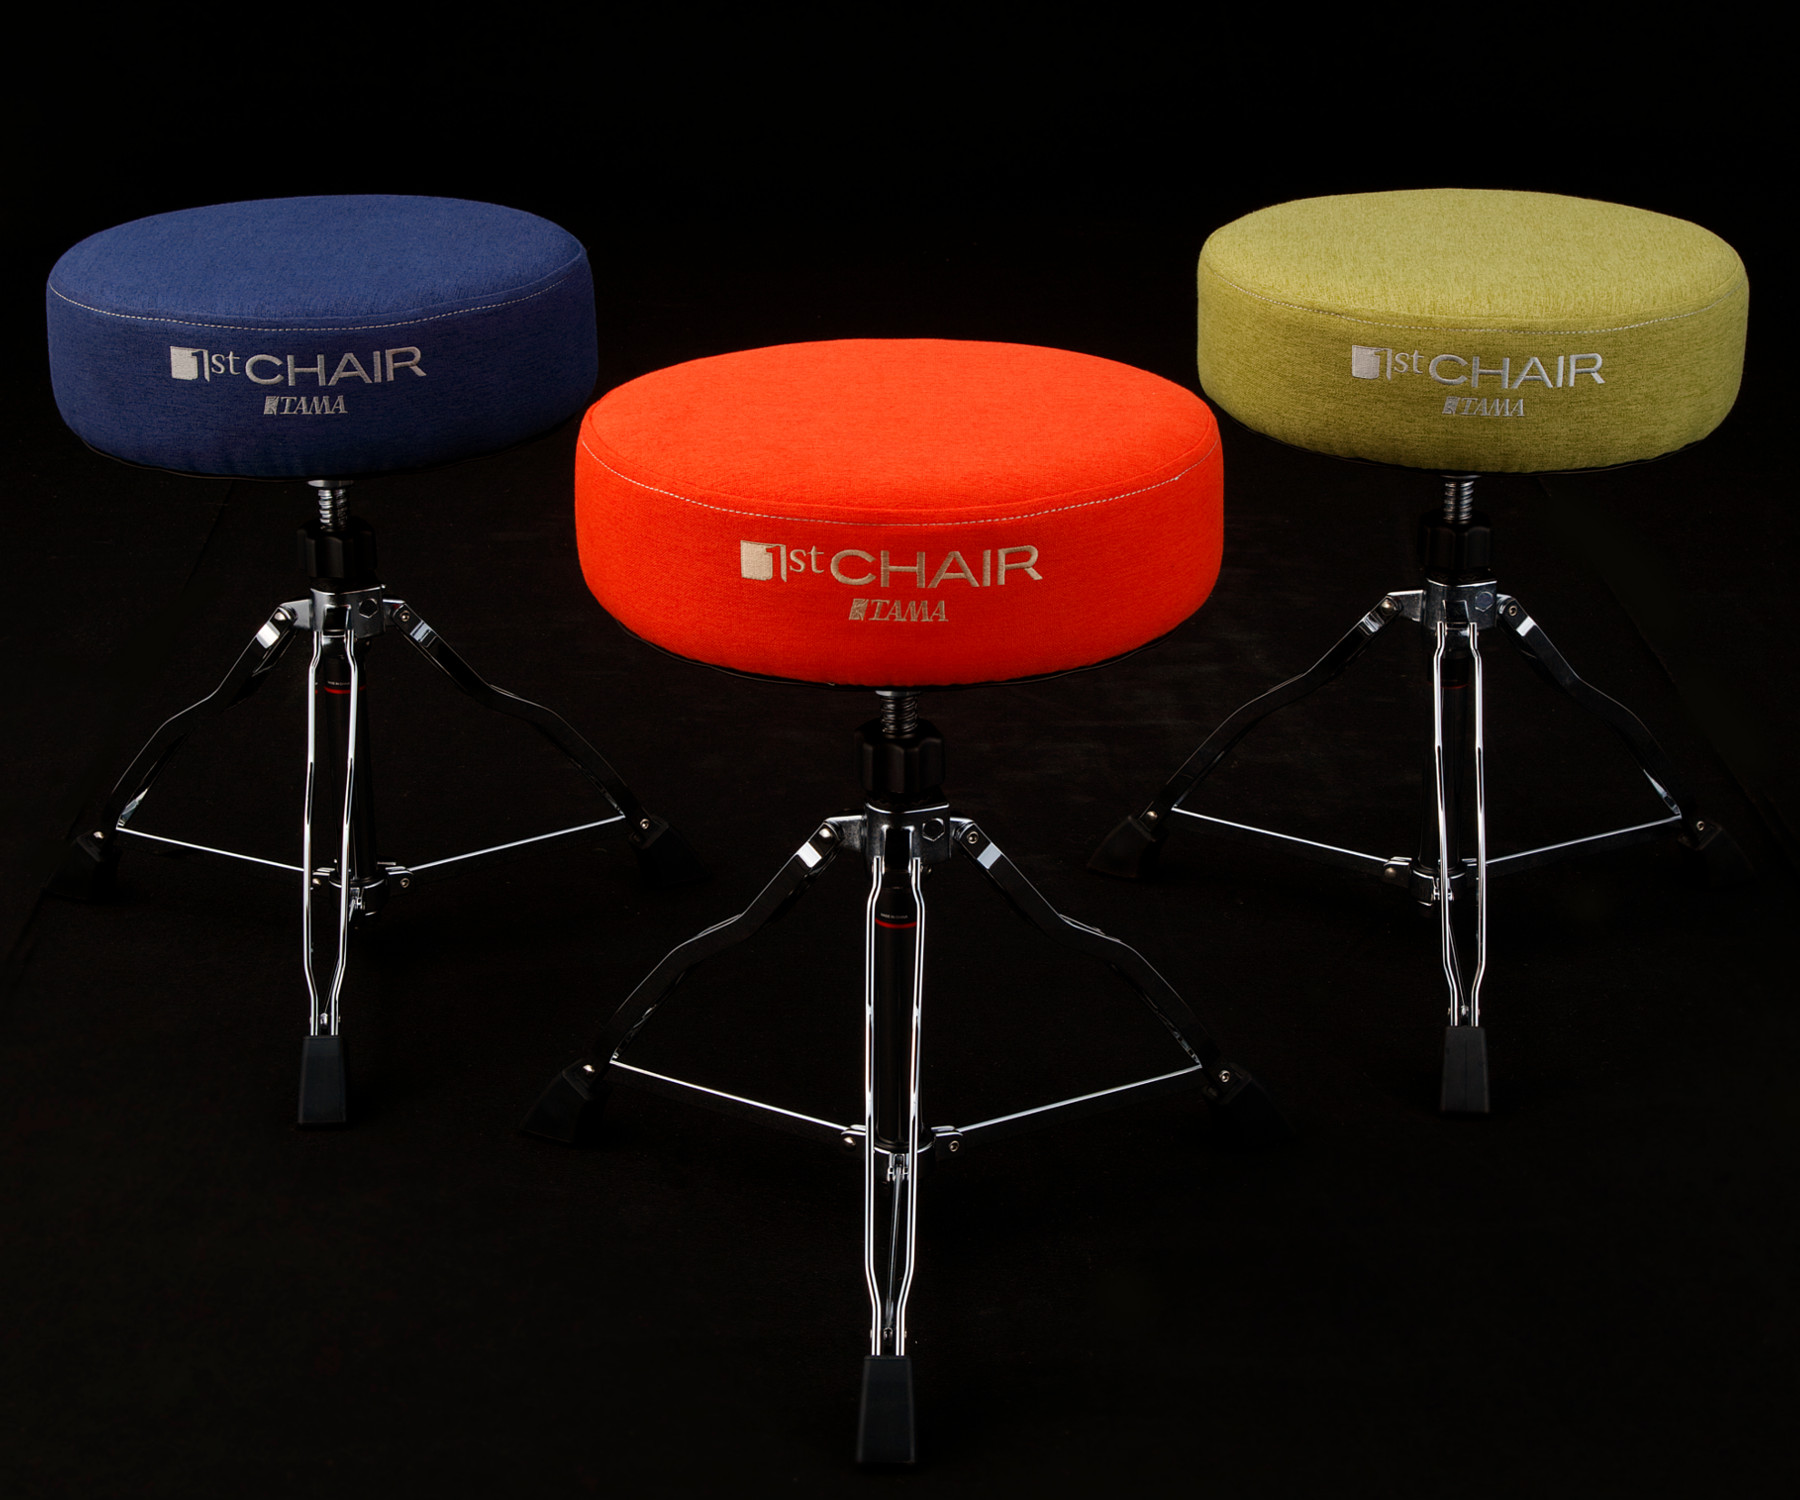 1st Chair Round Rider w/Three Color Fabric Top Seats -Limited 